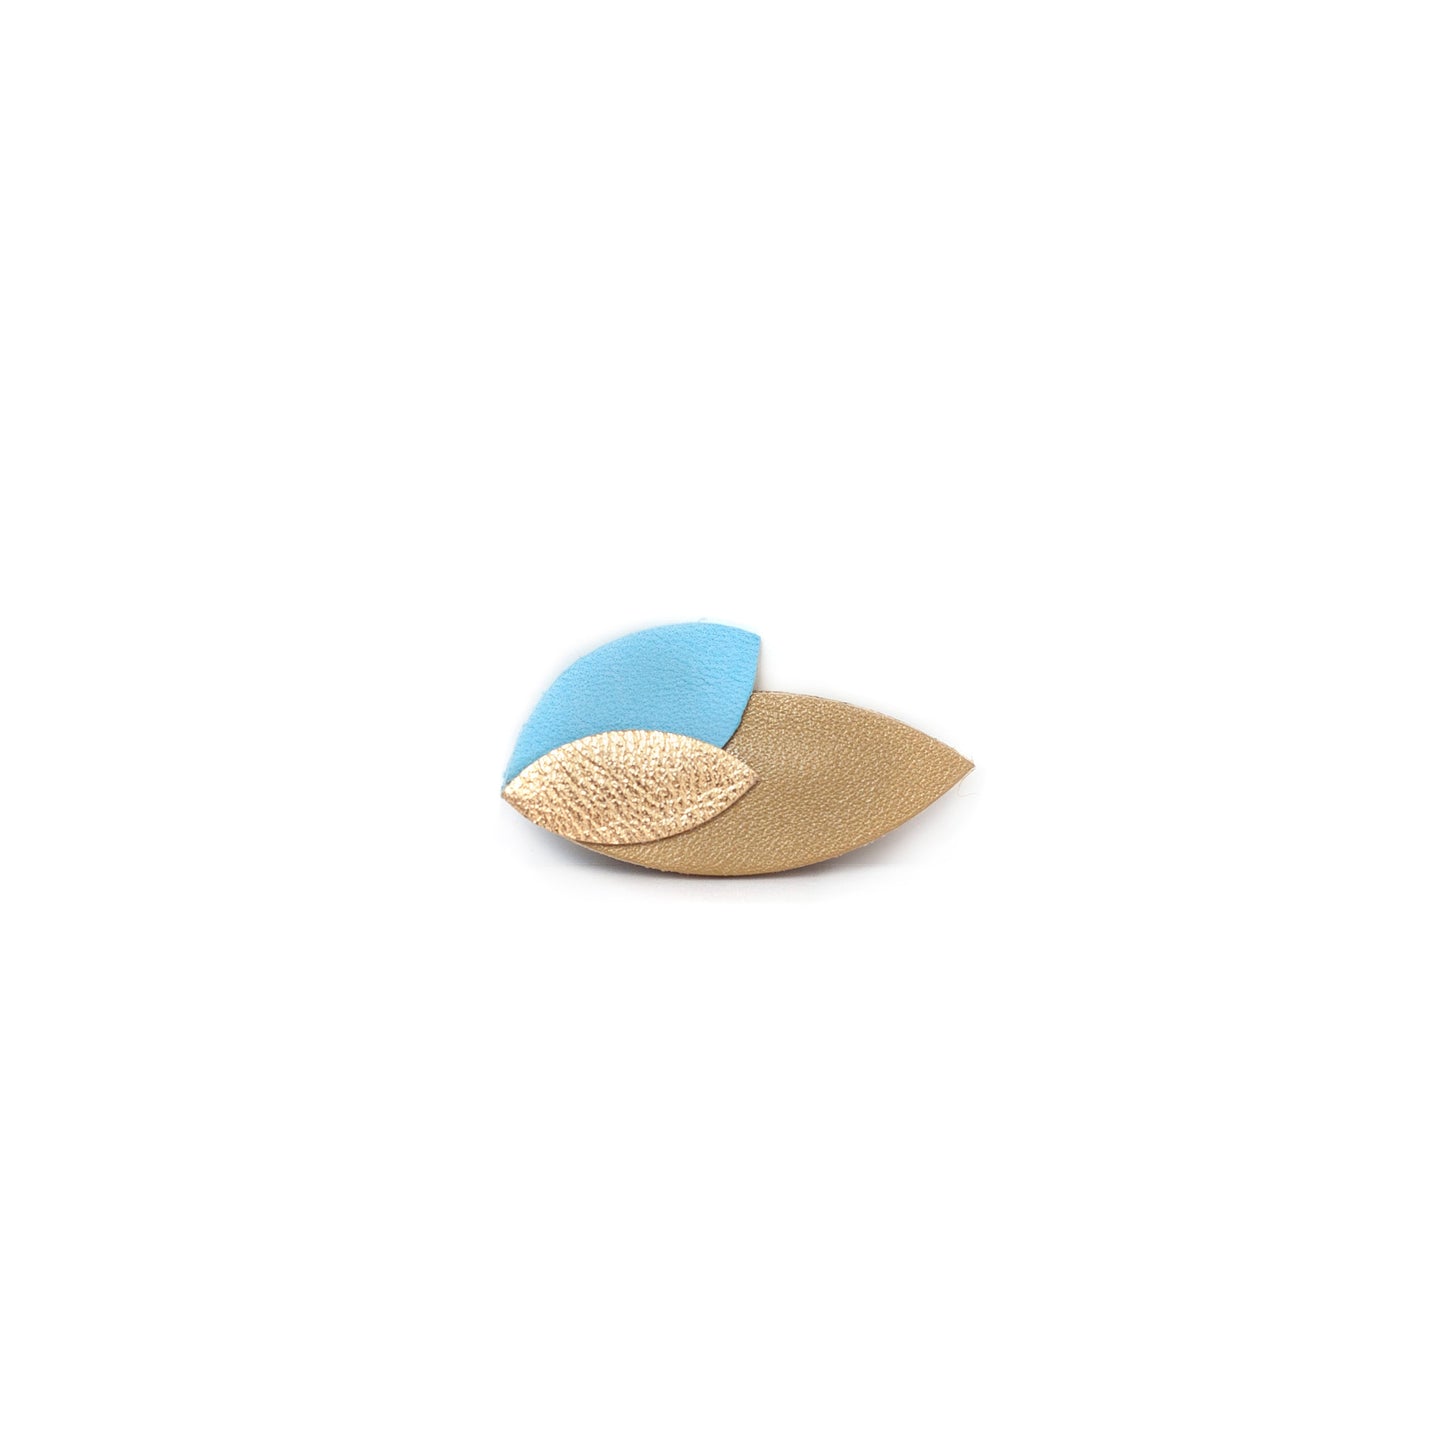 Leaf brooch in golden blue and bronze leather